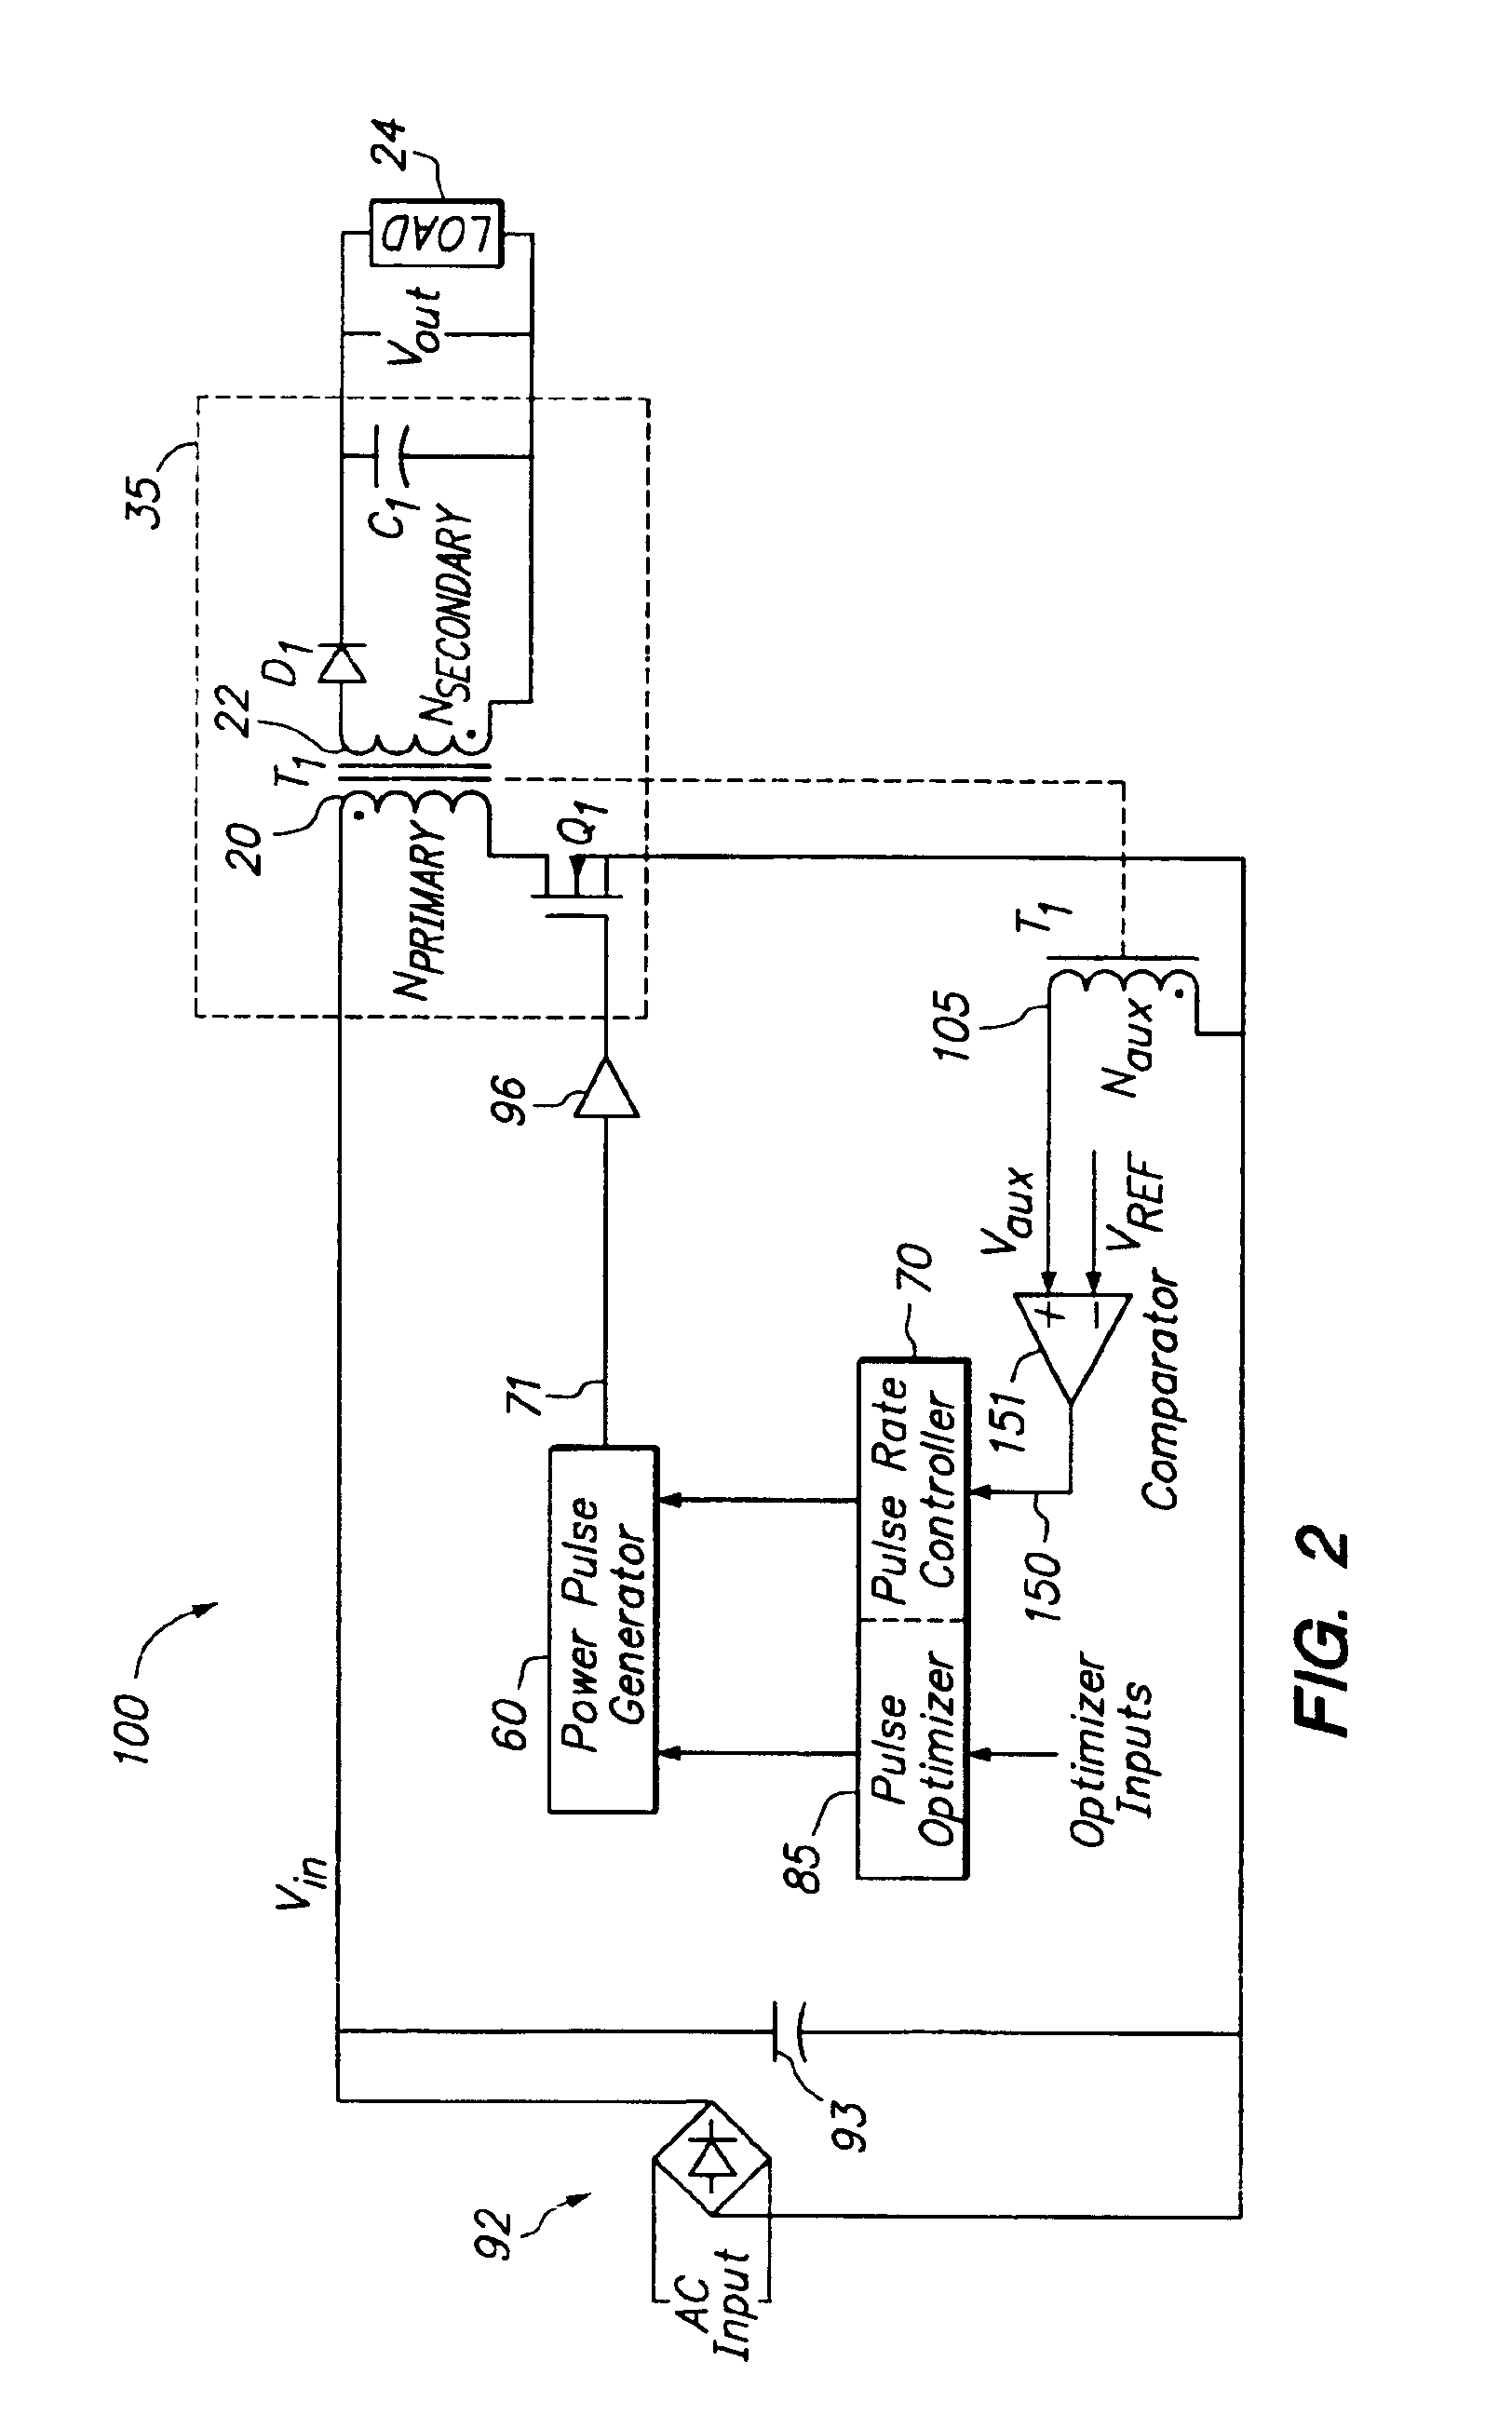 Method of driving a power converter by using a power pulse and a sense pulse